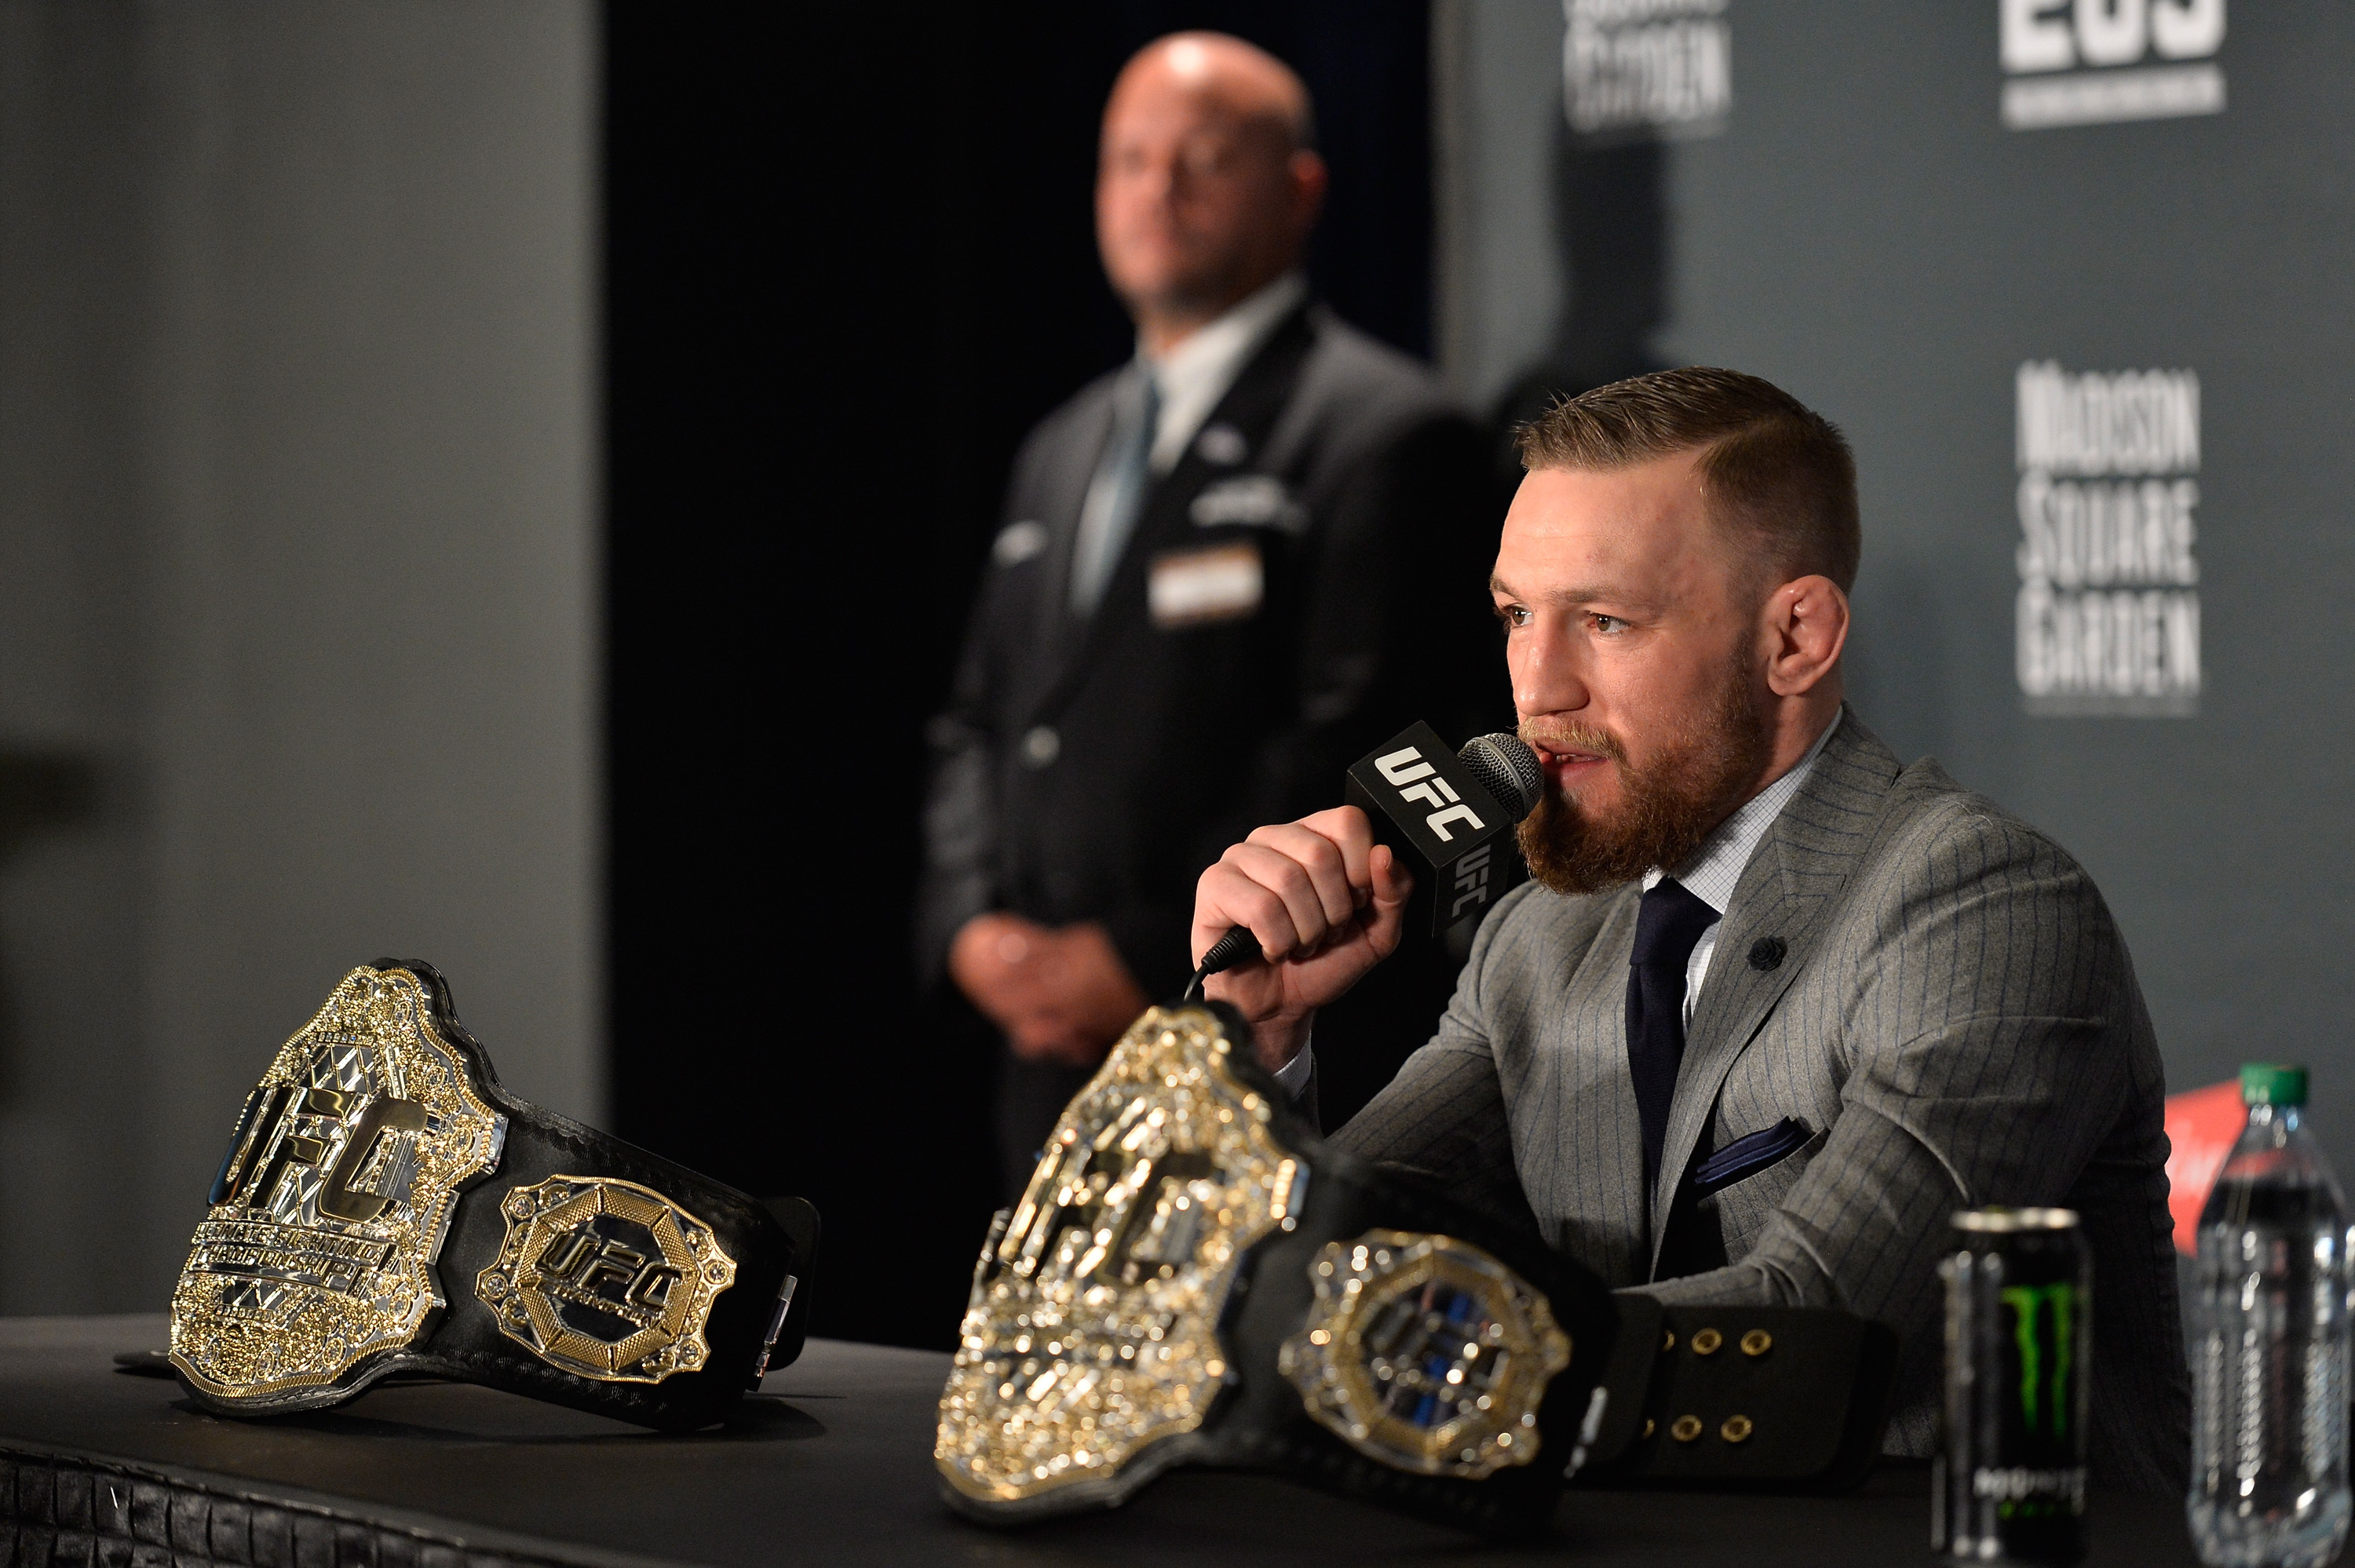 Conor McGregor vs. Floyd Mayweather Would Be a 'Disaster,' Says Eddie Hearn - Bleacher Report